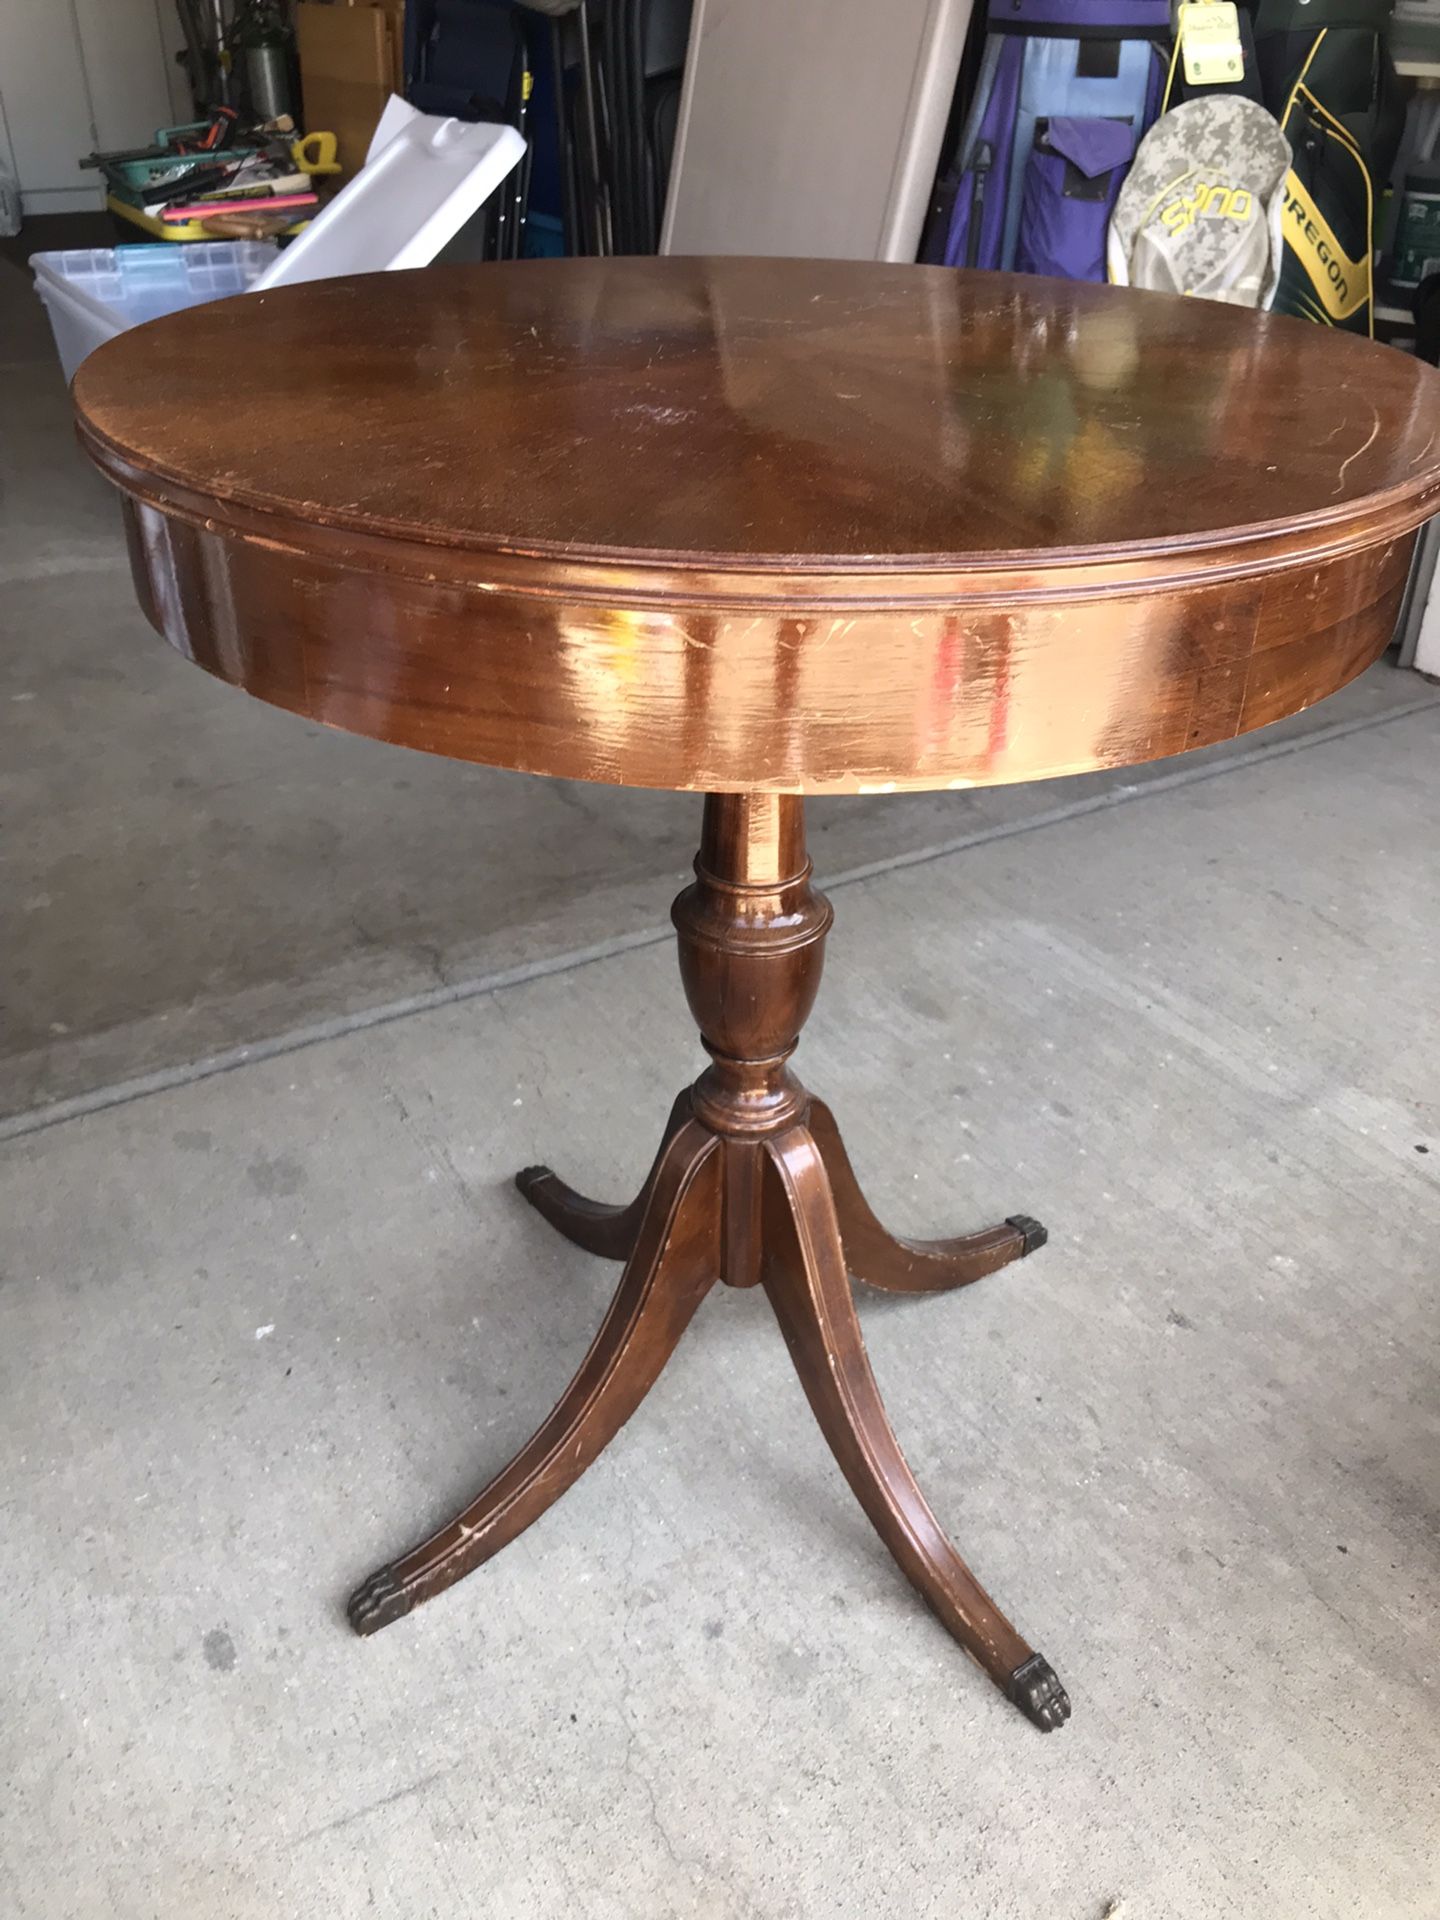 Table $20 